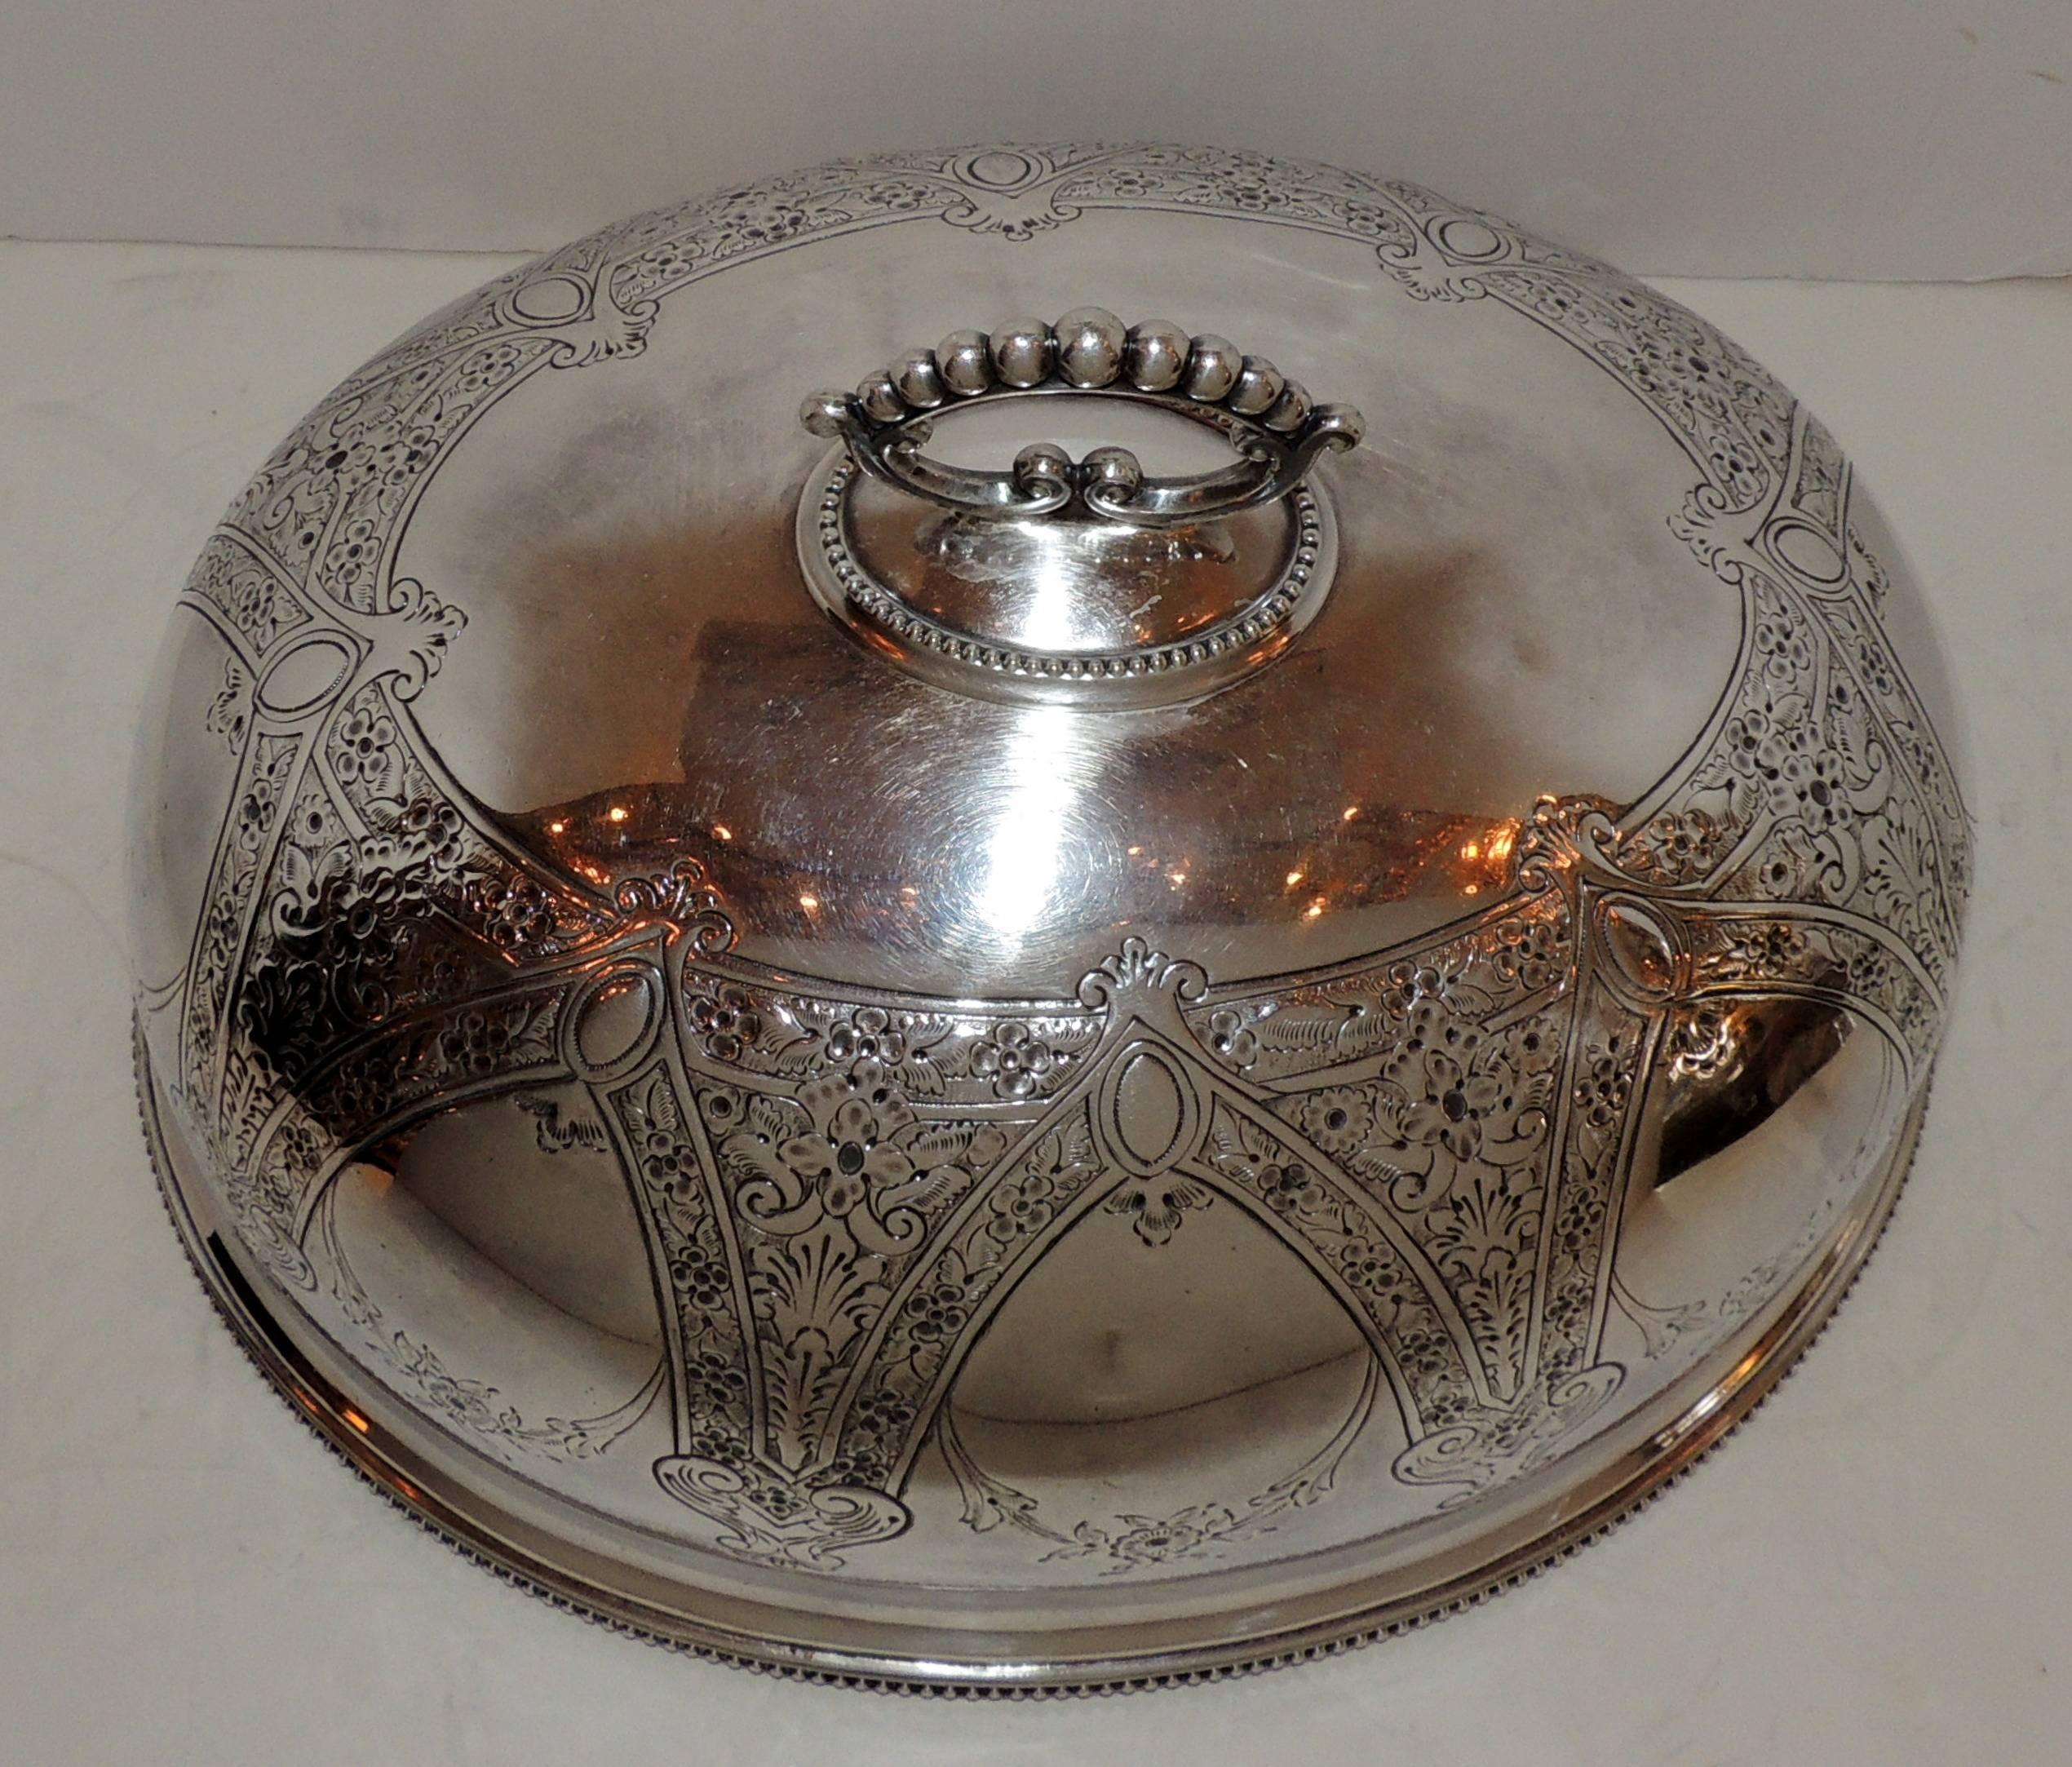 A wonderful large antique silver plated meat / food, turkey dome / cover Victorian cloche serving piece with handle.